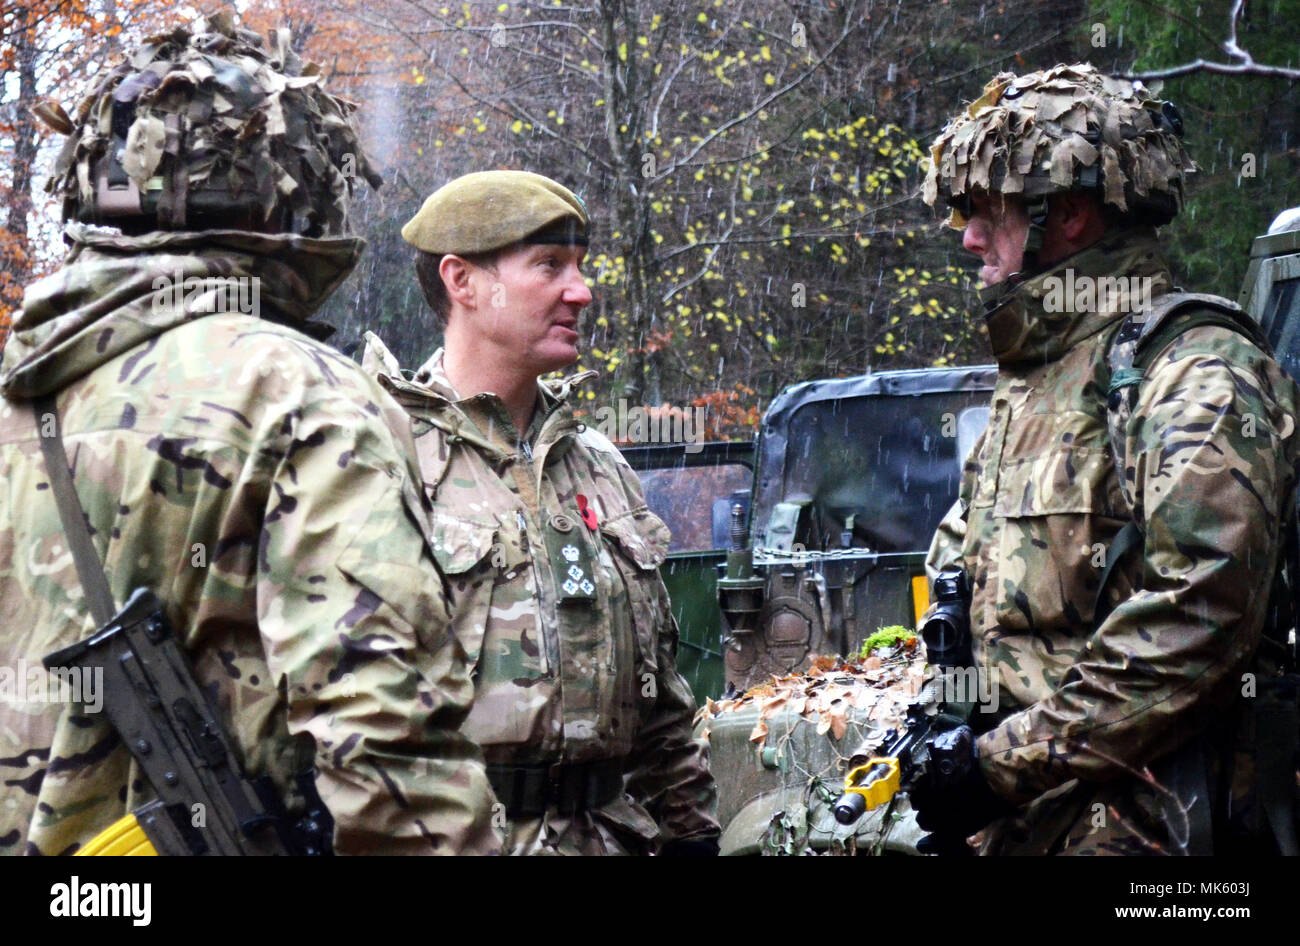 Brig. Gen. Zac Stenning, Commander, 1st Mechanized Brigade, British Army, stops by to visit with British soldiers with the 1st Battalion, Royal Regiment of the Fusiliers training at the U.S. Army's Joint Multinational Readiness Center in Hohenfels, Germany, as they participate in Allied Spirit VII, 12 Nov. 2017. Approximately 4,050 service members from 13 nations are participating in exercise Allied Spirit VII at 7th Army Training Command’s Hohenfels Training Area, Germany, Oct. 30 to Nov. 22, 2017. Allied Spirit is a U.S. Army Europe-directed, 7ATC-conducted multinational exercise series desi Stock Photo